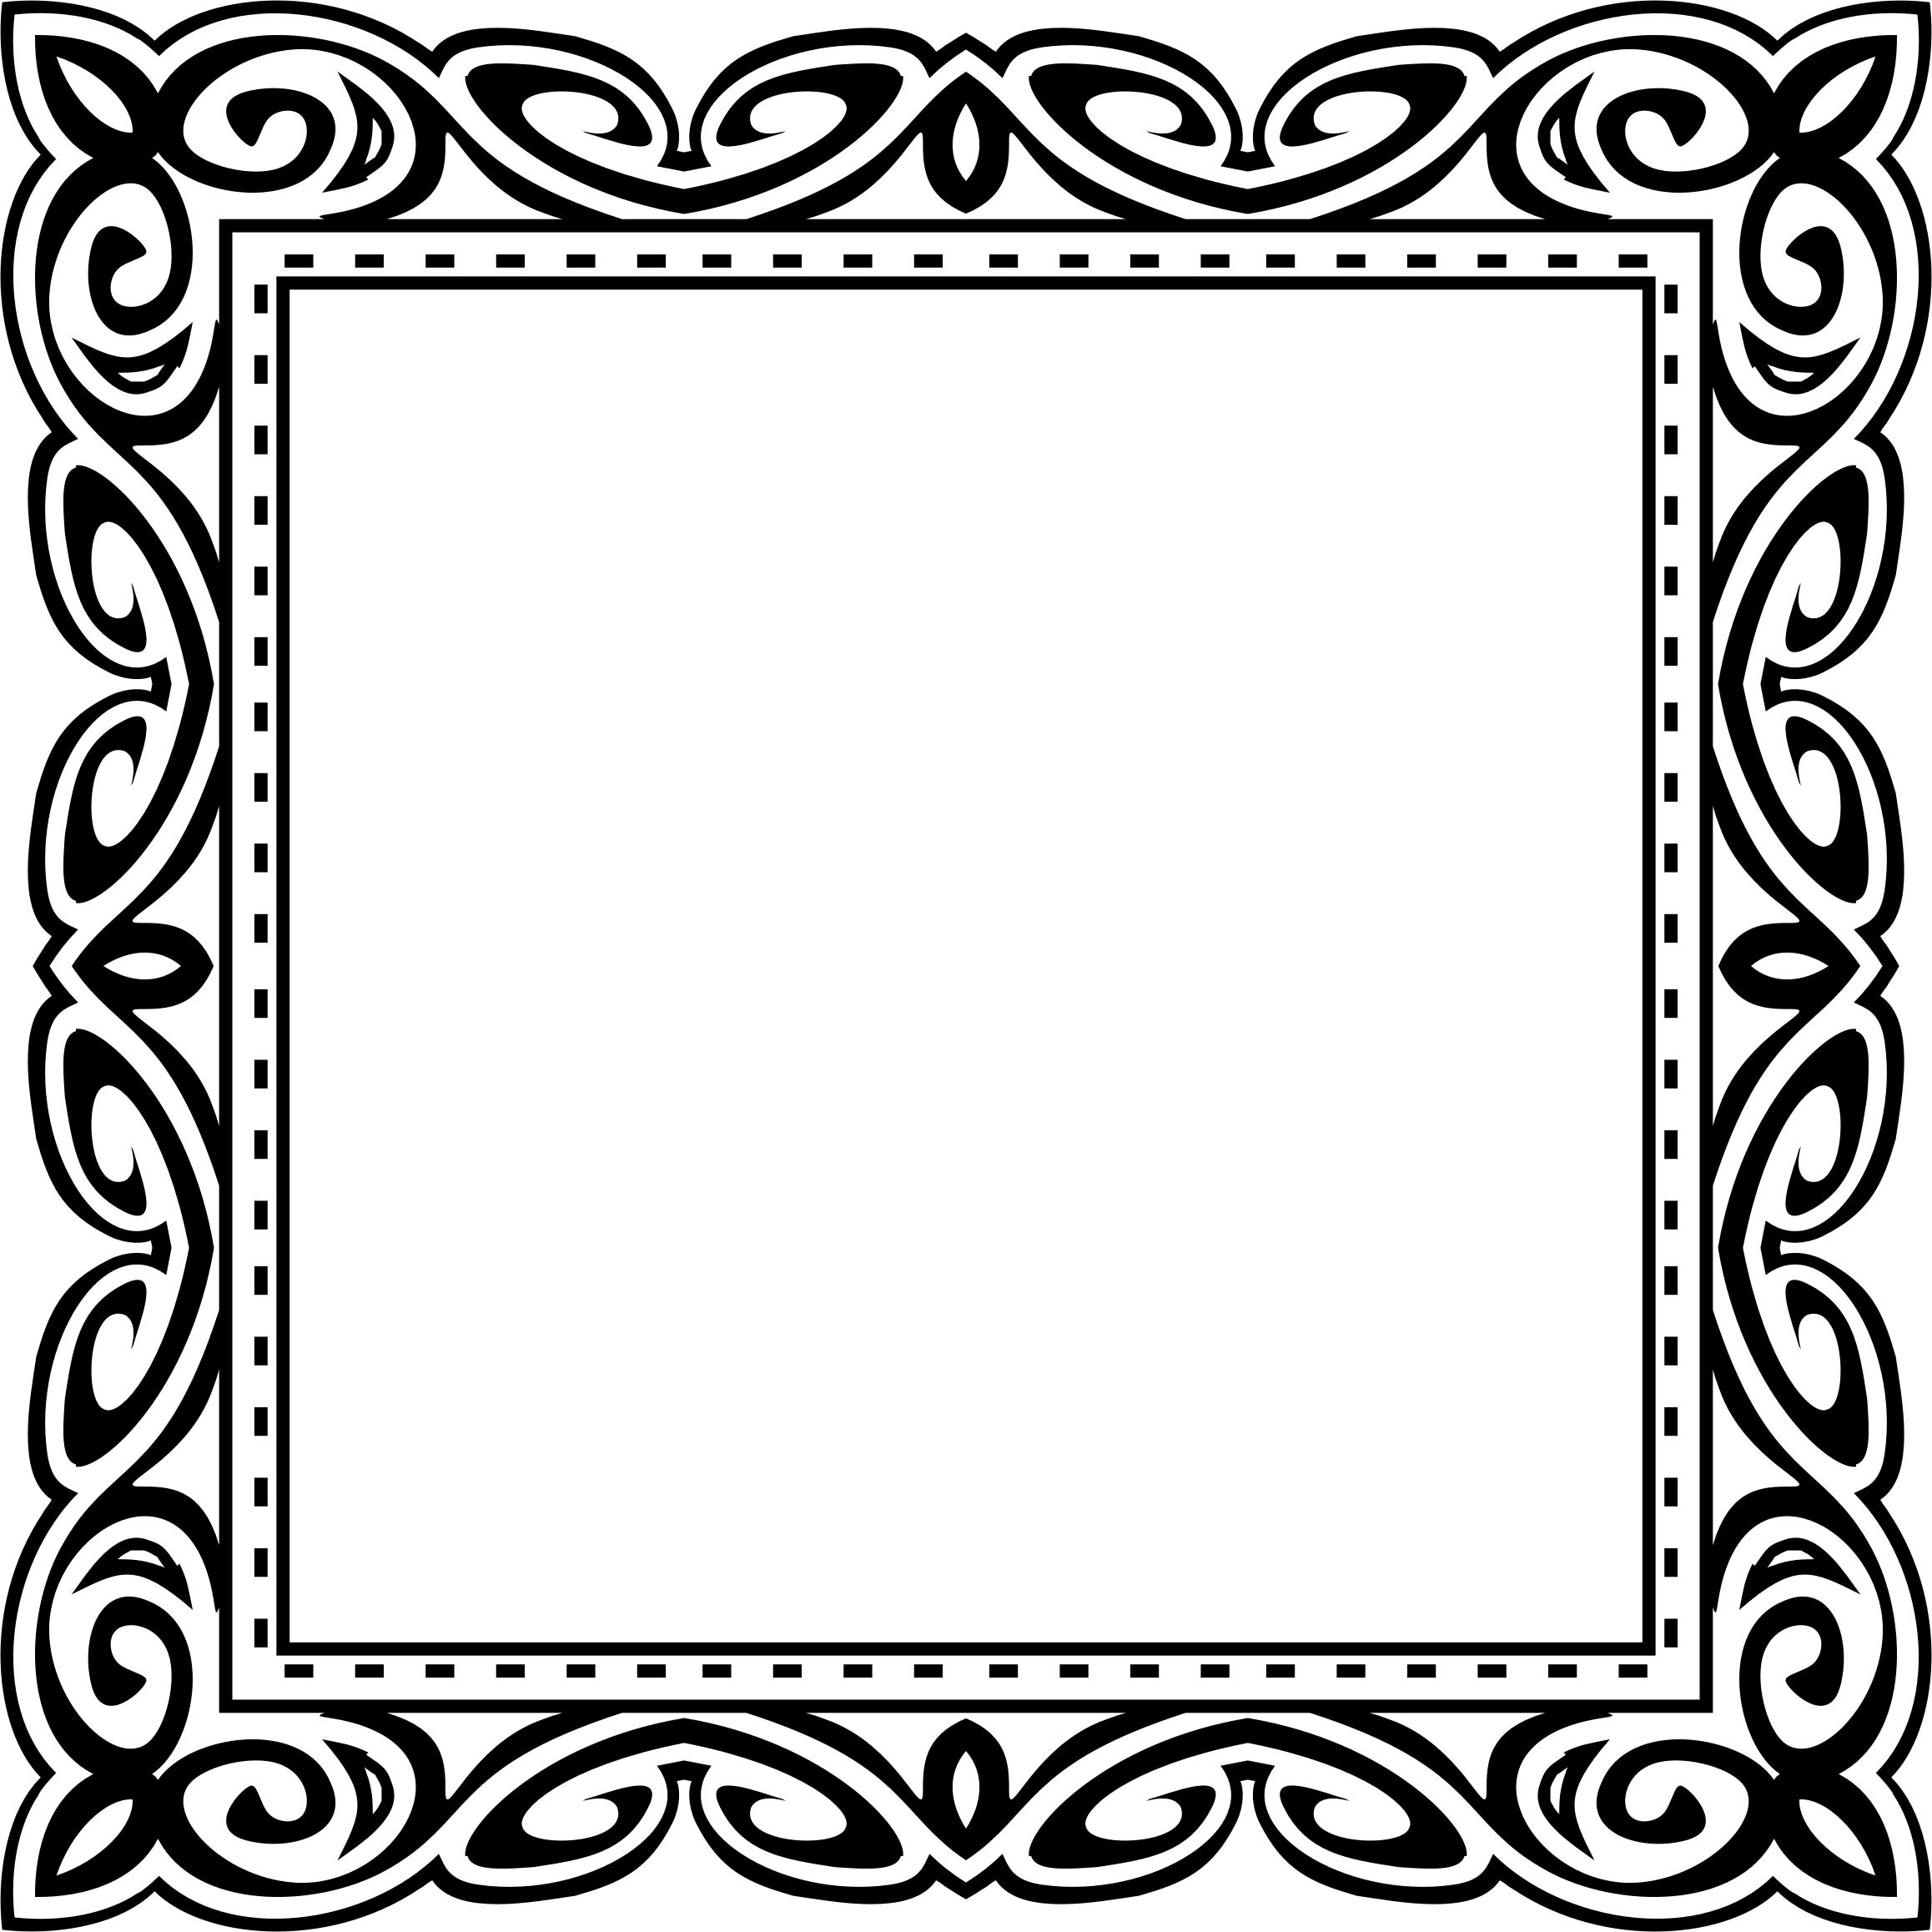 Abstract Black Frame Design 15 png icons in Packs SVG download | Free ...